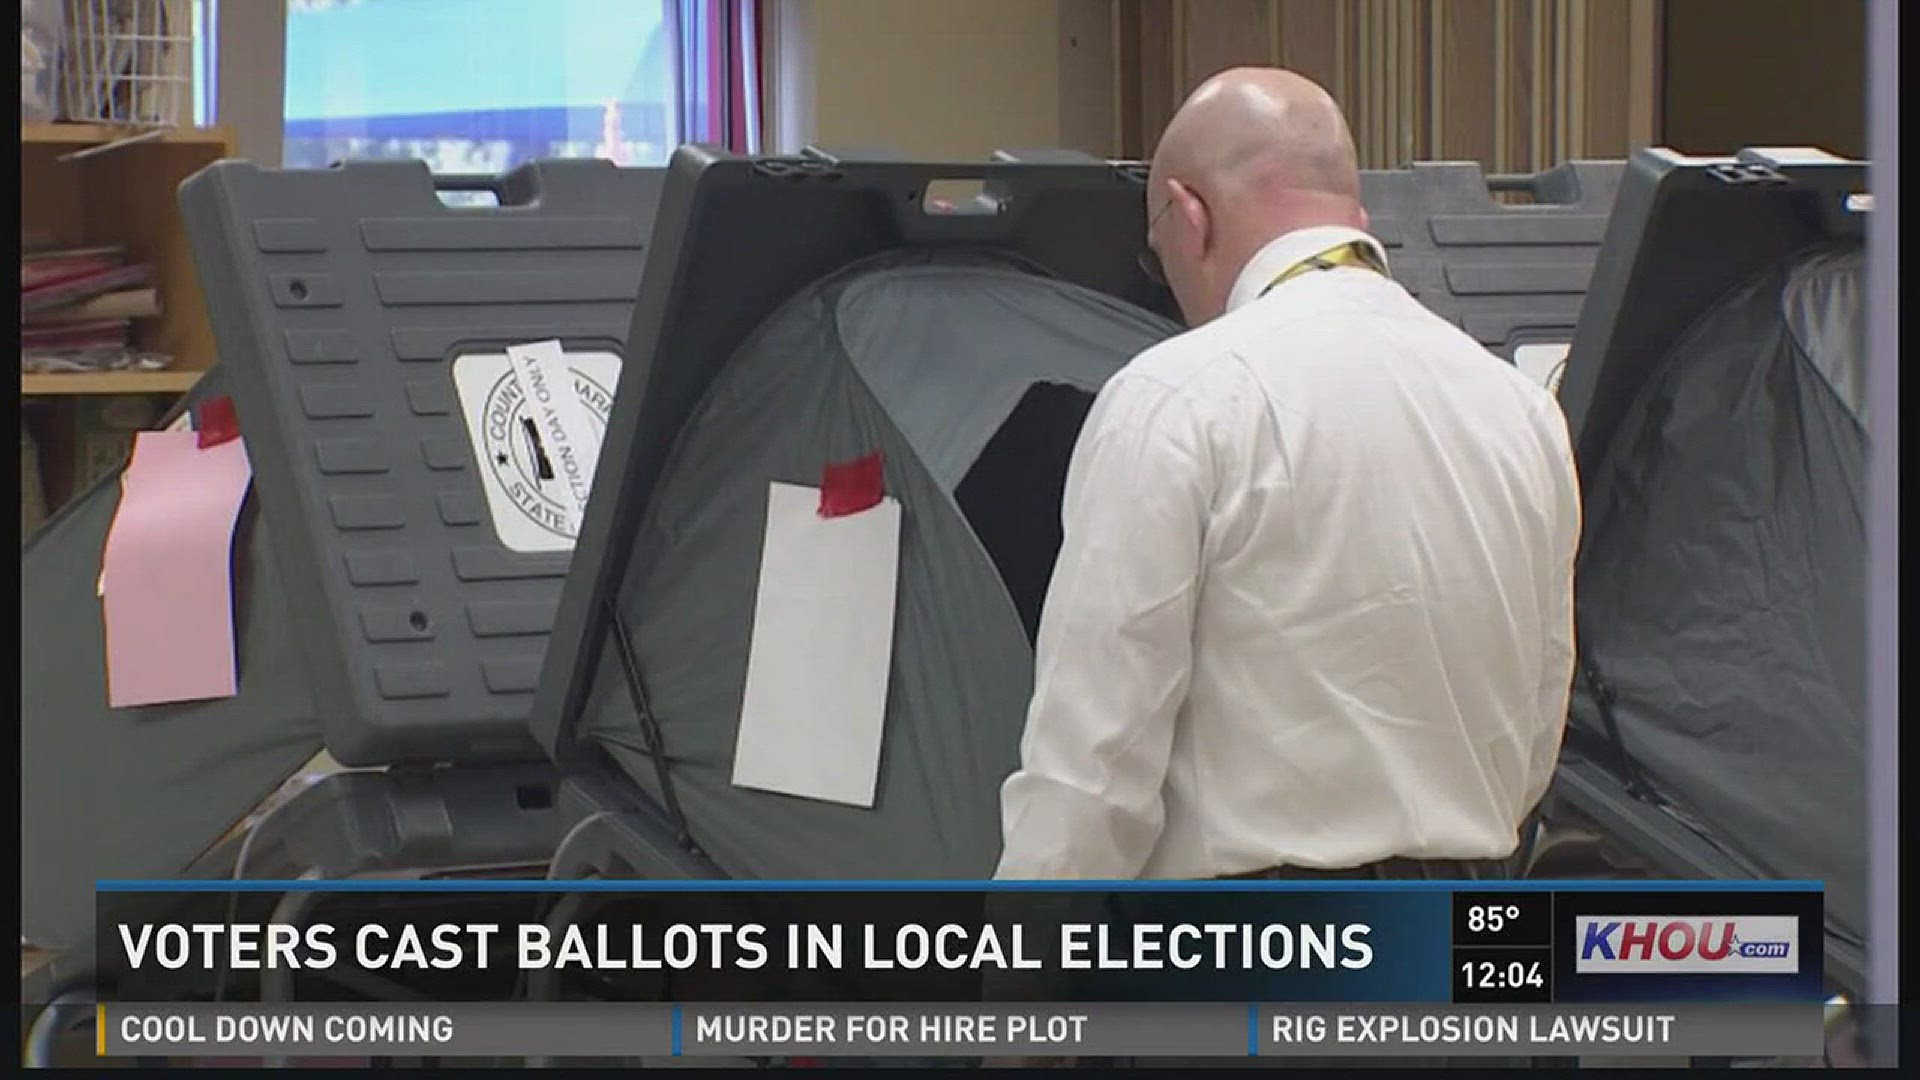 Turnout's been steady, but not packed like it usually is when there's a mayor or city council race. But there are still several important issues on the ballot that could affect your tax dollars.